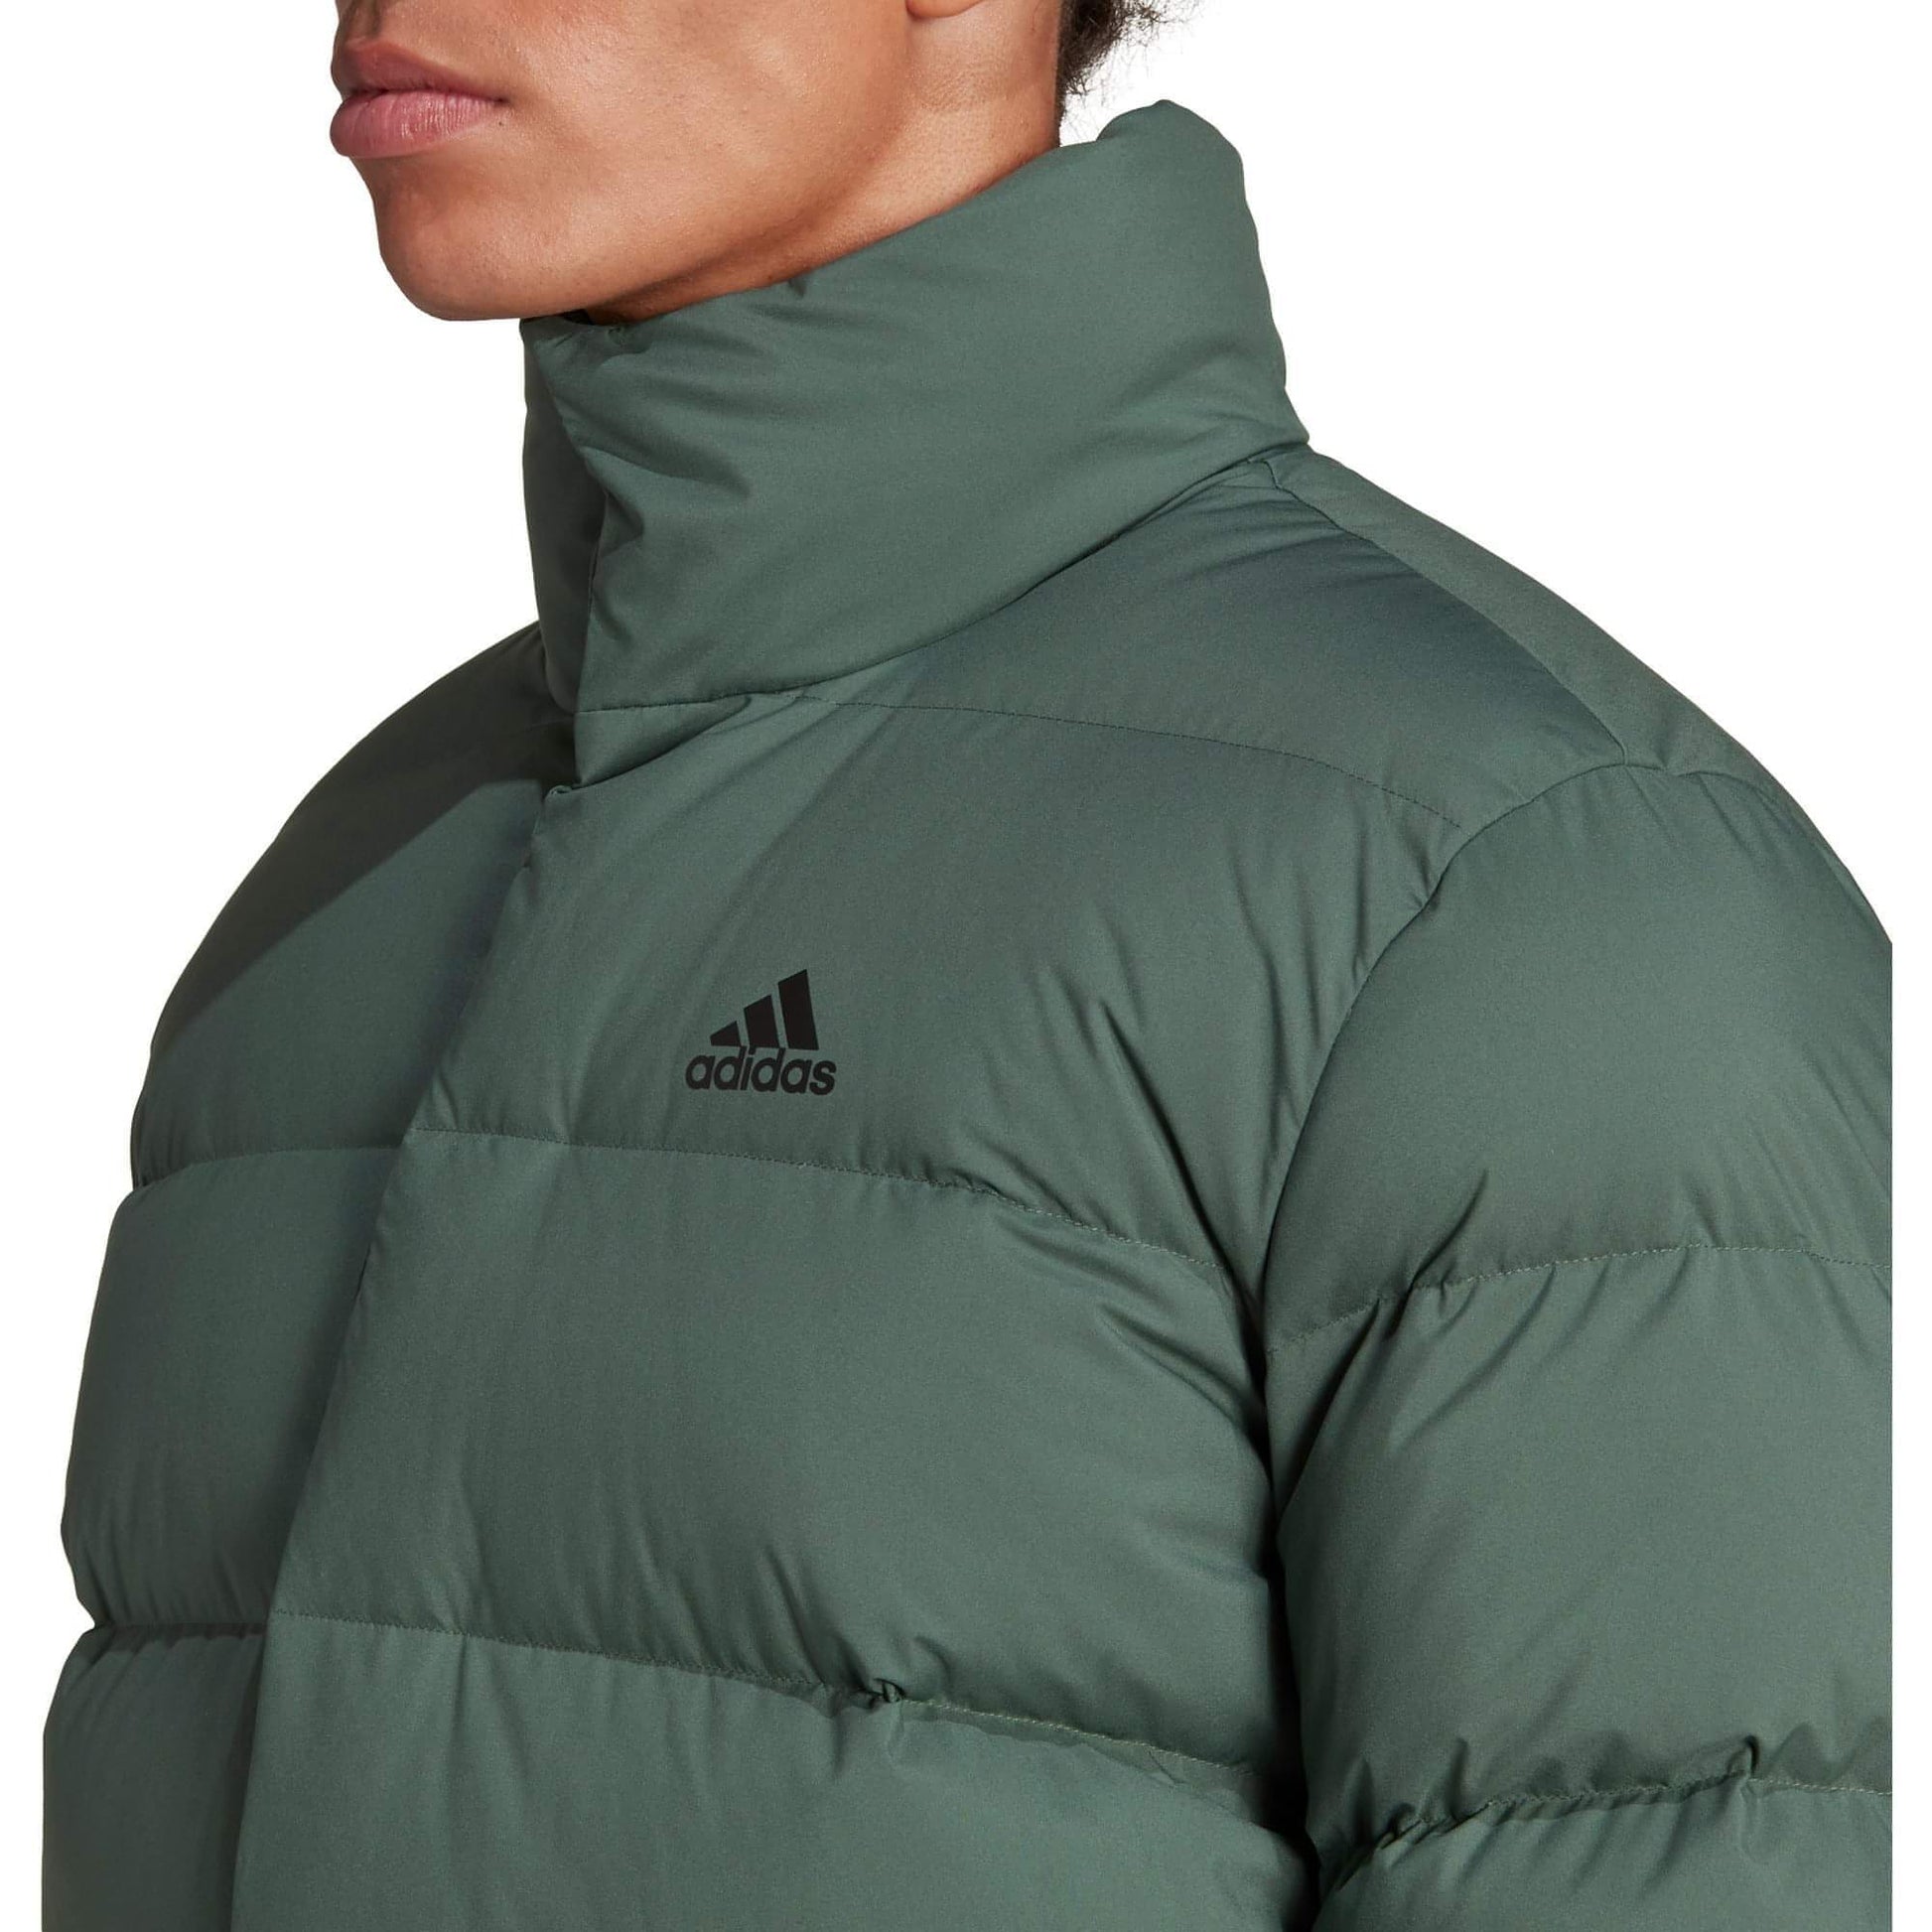 Adidas Helionic Mid Length Down Jacket Hg6282 Details